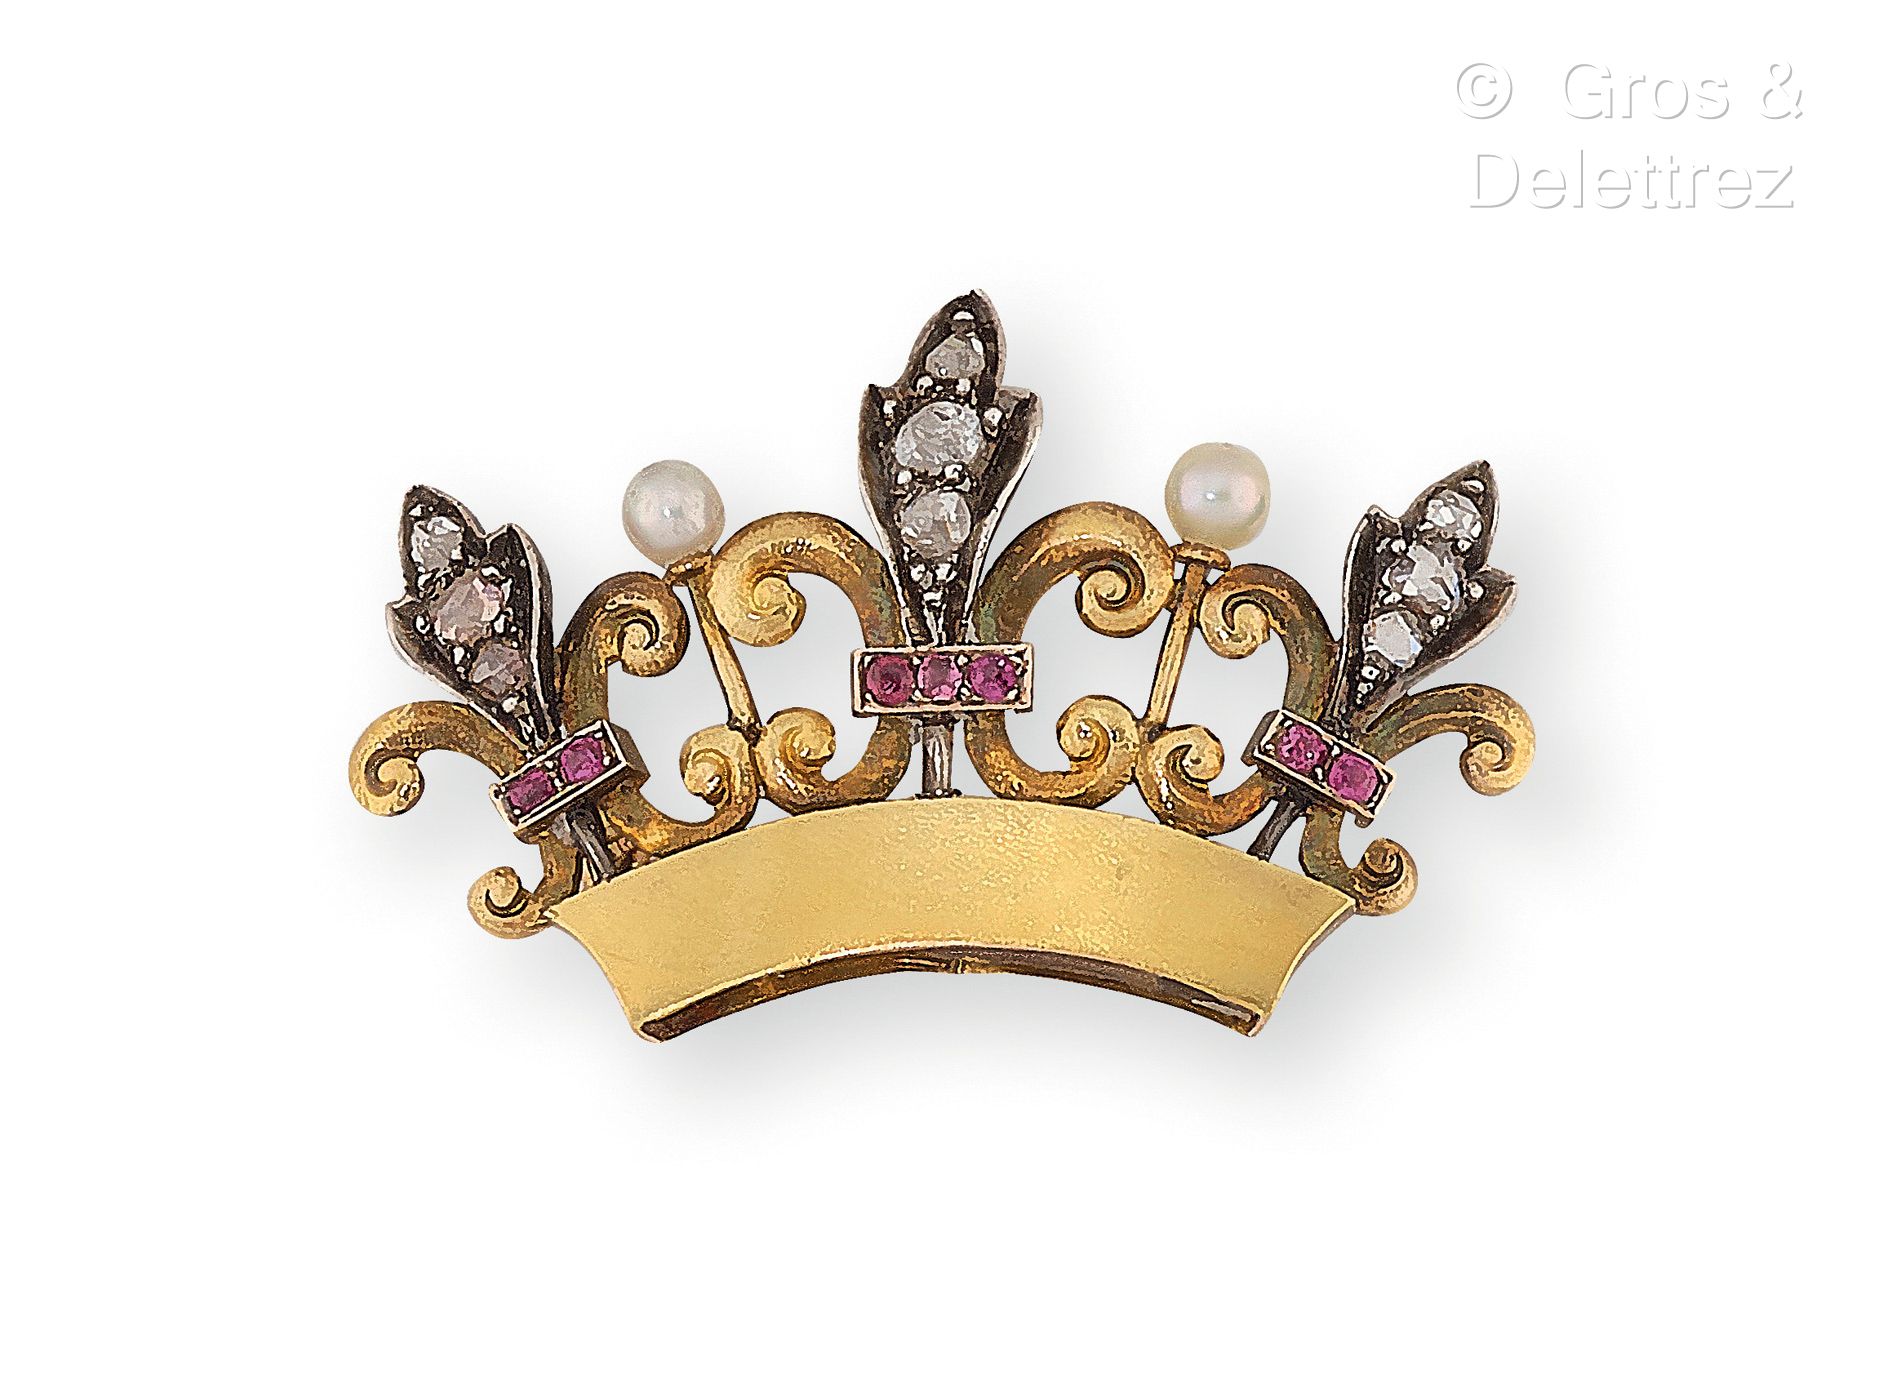 Null French work from the second half of the 19th century - "Couronne" brooch in&hellip;